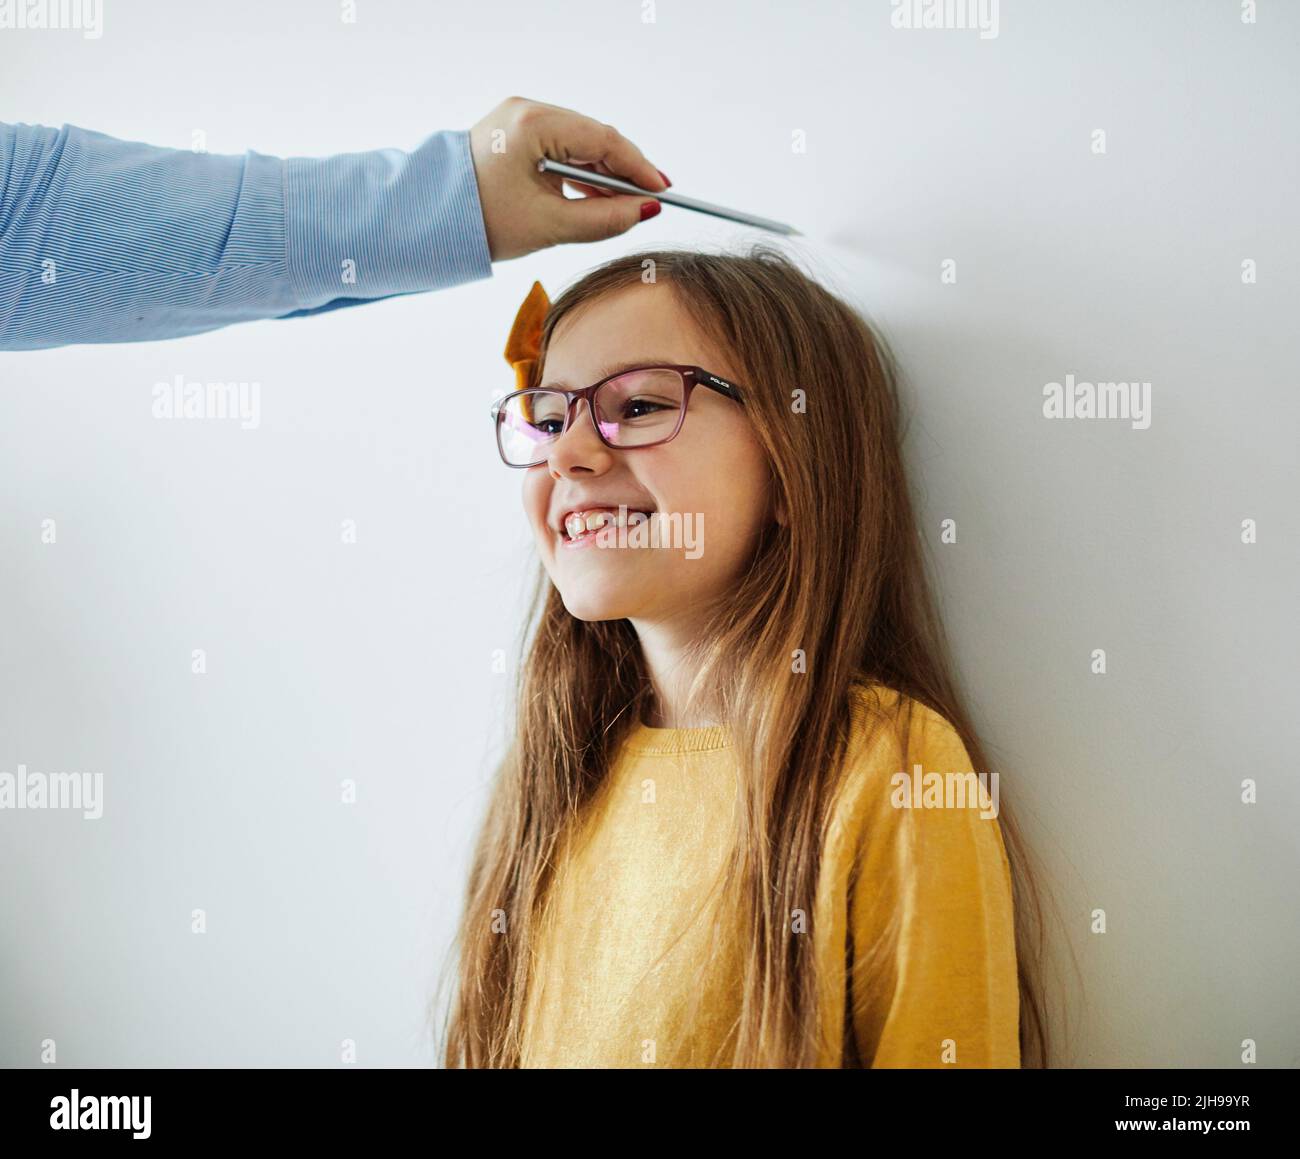 daughter mother measuring height growth childhood tall child heigth kid wall cute Stock Photo